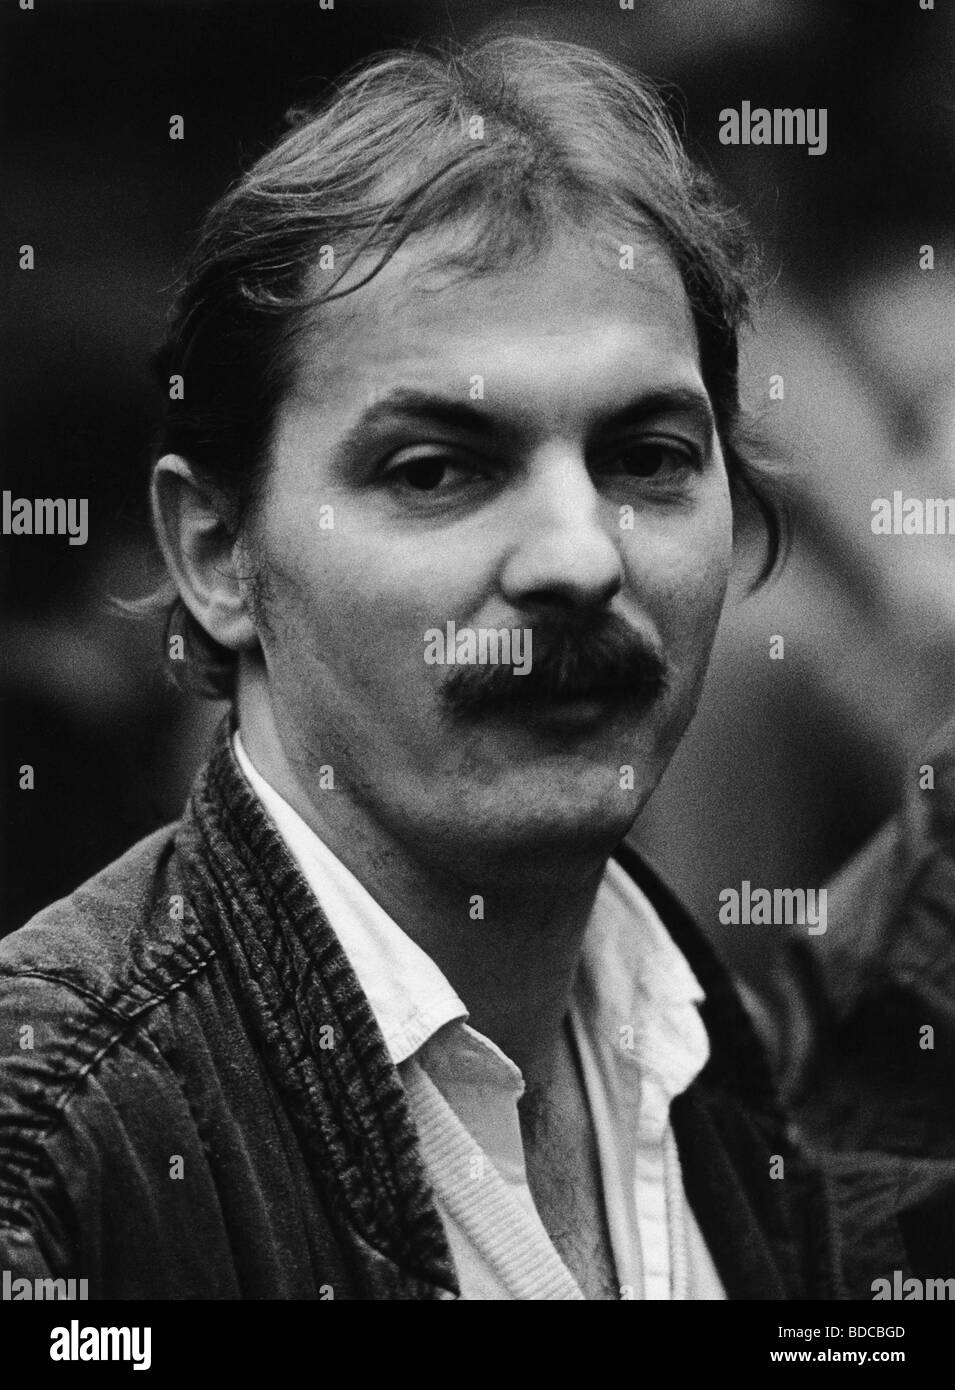 Kleinert, Hubert, * 19.4.1954, German political scientist, politician (Alliance '90/The Greens), portrait, federal party conference of The Greens, Hamburg, 7.-9.12.1984, , Stock Photo